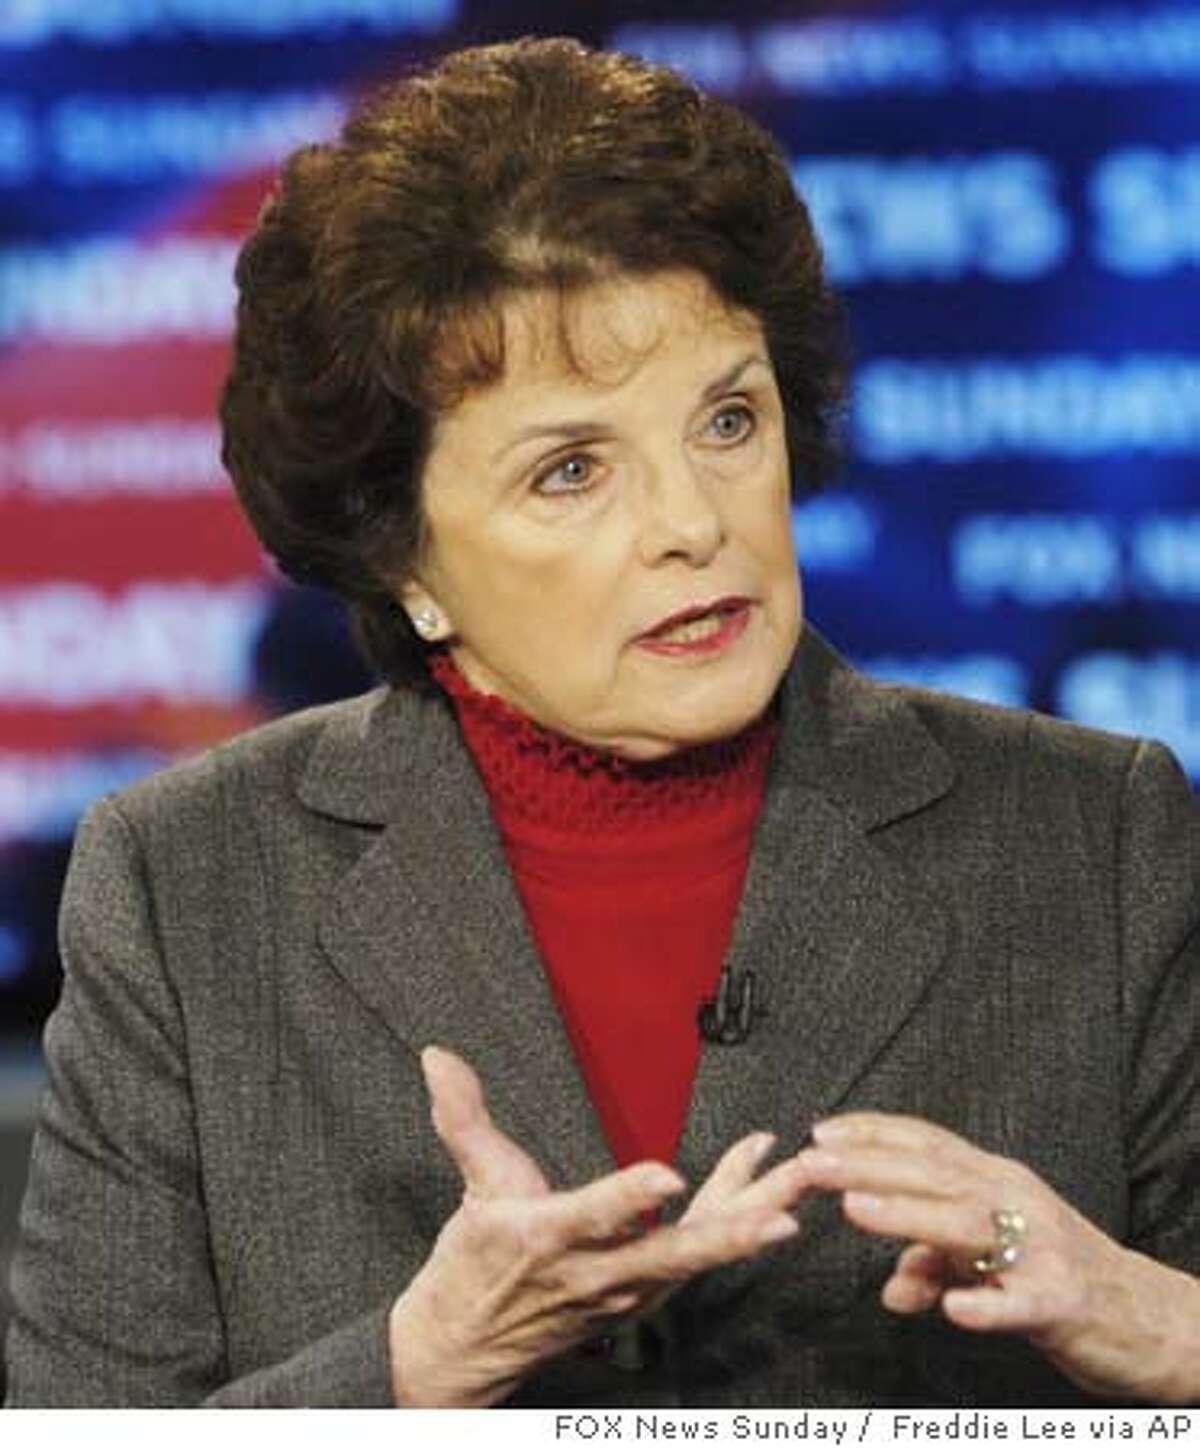 In the photograph provided by FOX News Sunday, Sen. Dianne Feinstein, D-Calif. talks about the inaugural speech of President Bush and the upcoming Iraq elections during the taping of "FOX News Sunday" at the FOX studios in Washington Sunday, Jan. 23, 2005. (AP Photo/FOX News Sunday, Freddie Lee) Ran on: 01-25-2005 Dianne Feinstein Ran on: 01-27-2005 Sen. Dianne Feinstein says Alberto Gonzales lacks candor and independence from the White House and shouldnt become U.S. attorney general. Ran on: 01-27-2005 Sen. Dianne Feinstein says Albert Gonzales lacks candor and independence from the White House and shouldnt become U.S. attorney general. Ran on: 02-02-2005 Sen. Dianne Feinstein, left, said she was ready to support Alberto Gonzales, right, until he testified before the Judiciary Committee last month. Ran on: 02-02-2005 Ran on: 02-02-2005 Ran on: 02-02-2005 Sen. Dianne Feinstein, left, said she was ready to support Alberto Gonzales, right, until he testified before the Judiciary Committee last month. Ran on: 02-02-2005 MANDATORY CREDIT: FREDDIE LEE, FOX NEWS SUNDAY, , NO ARCHIVES PHOTO PROVIDED BY FOX NEWS SUNDAY